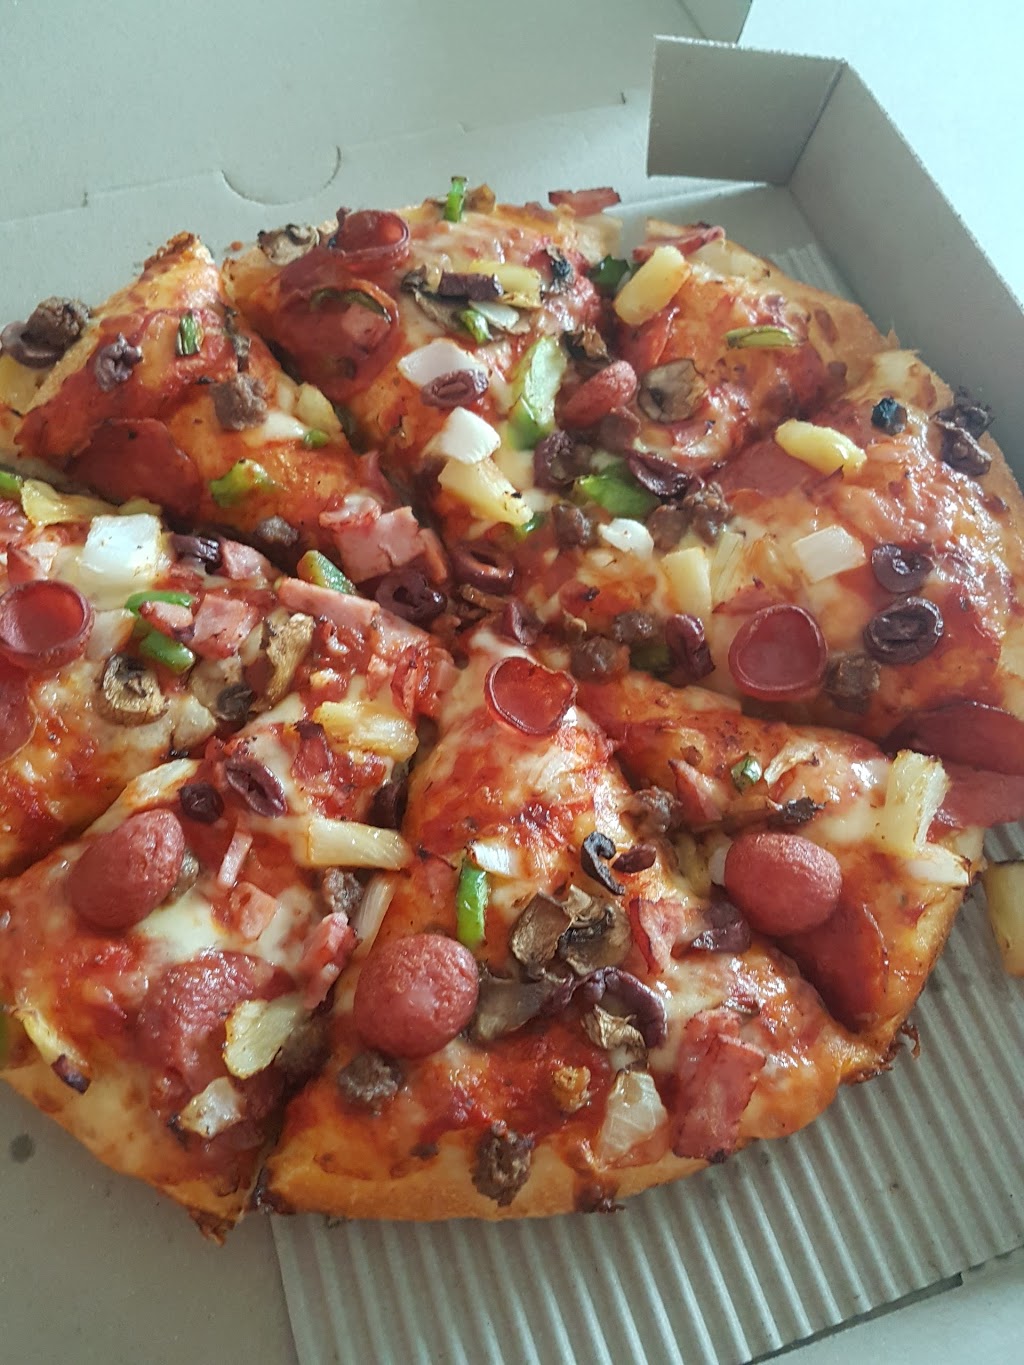 Pizza Hut Nowra | meal delivery | Shop 1/78 Kinghorne St, Nowra NSW 2540, Australia | 131166 OR +61 131166